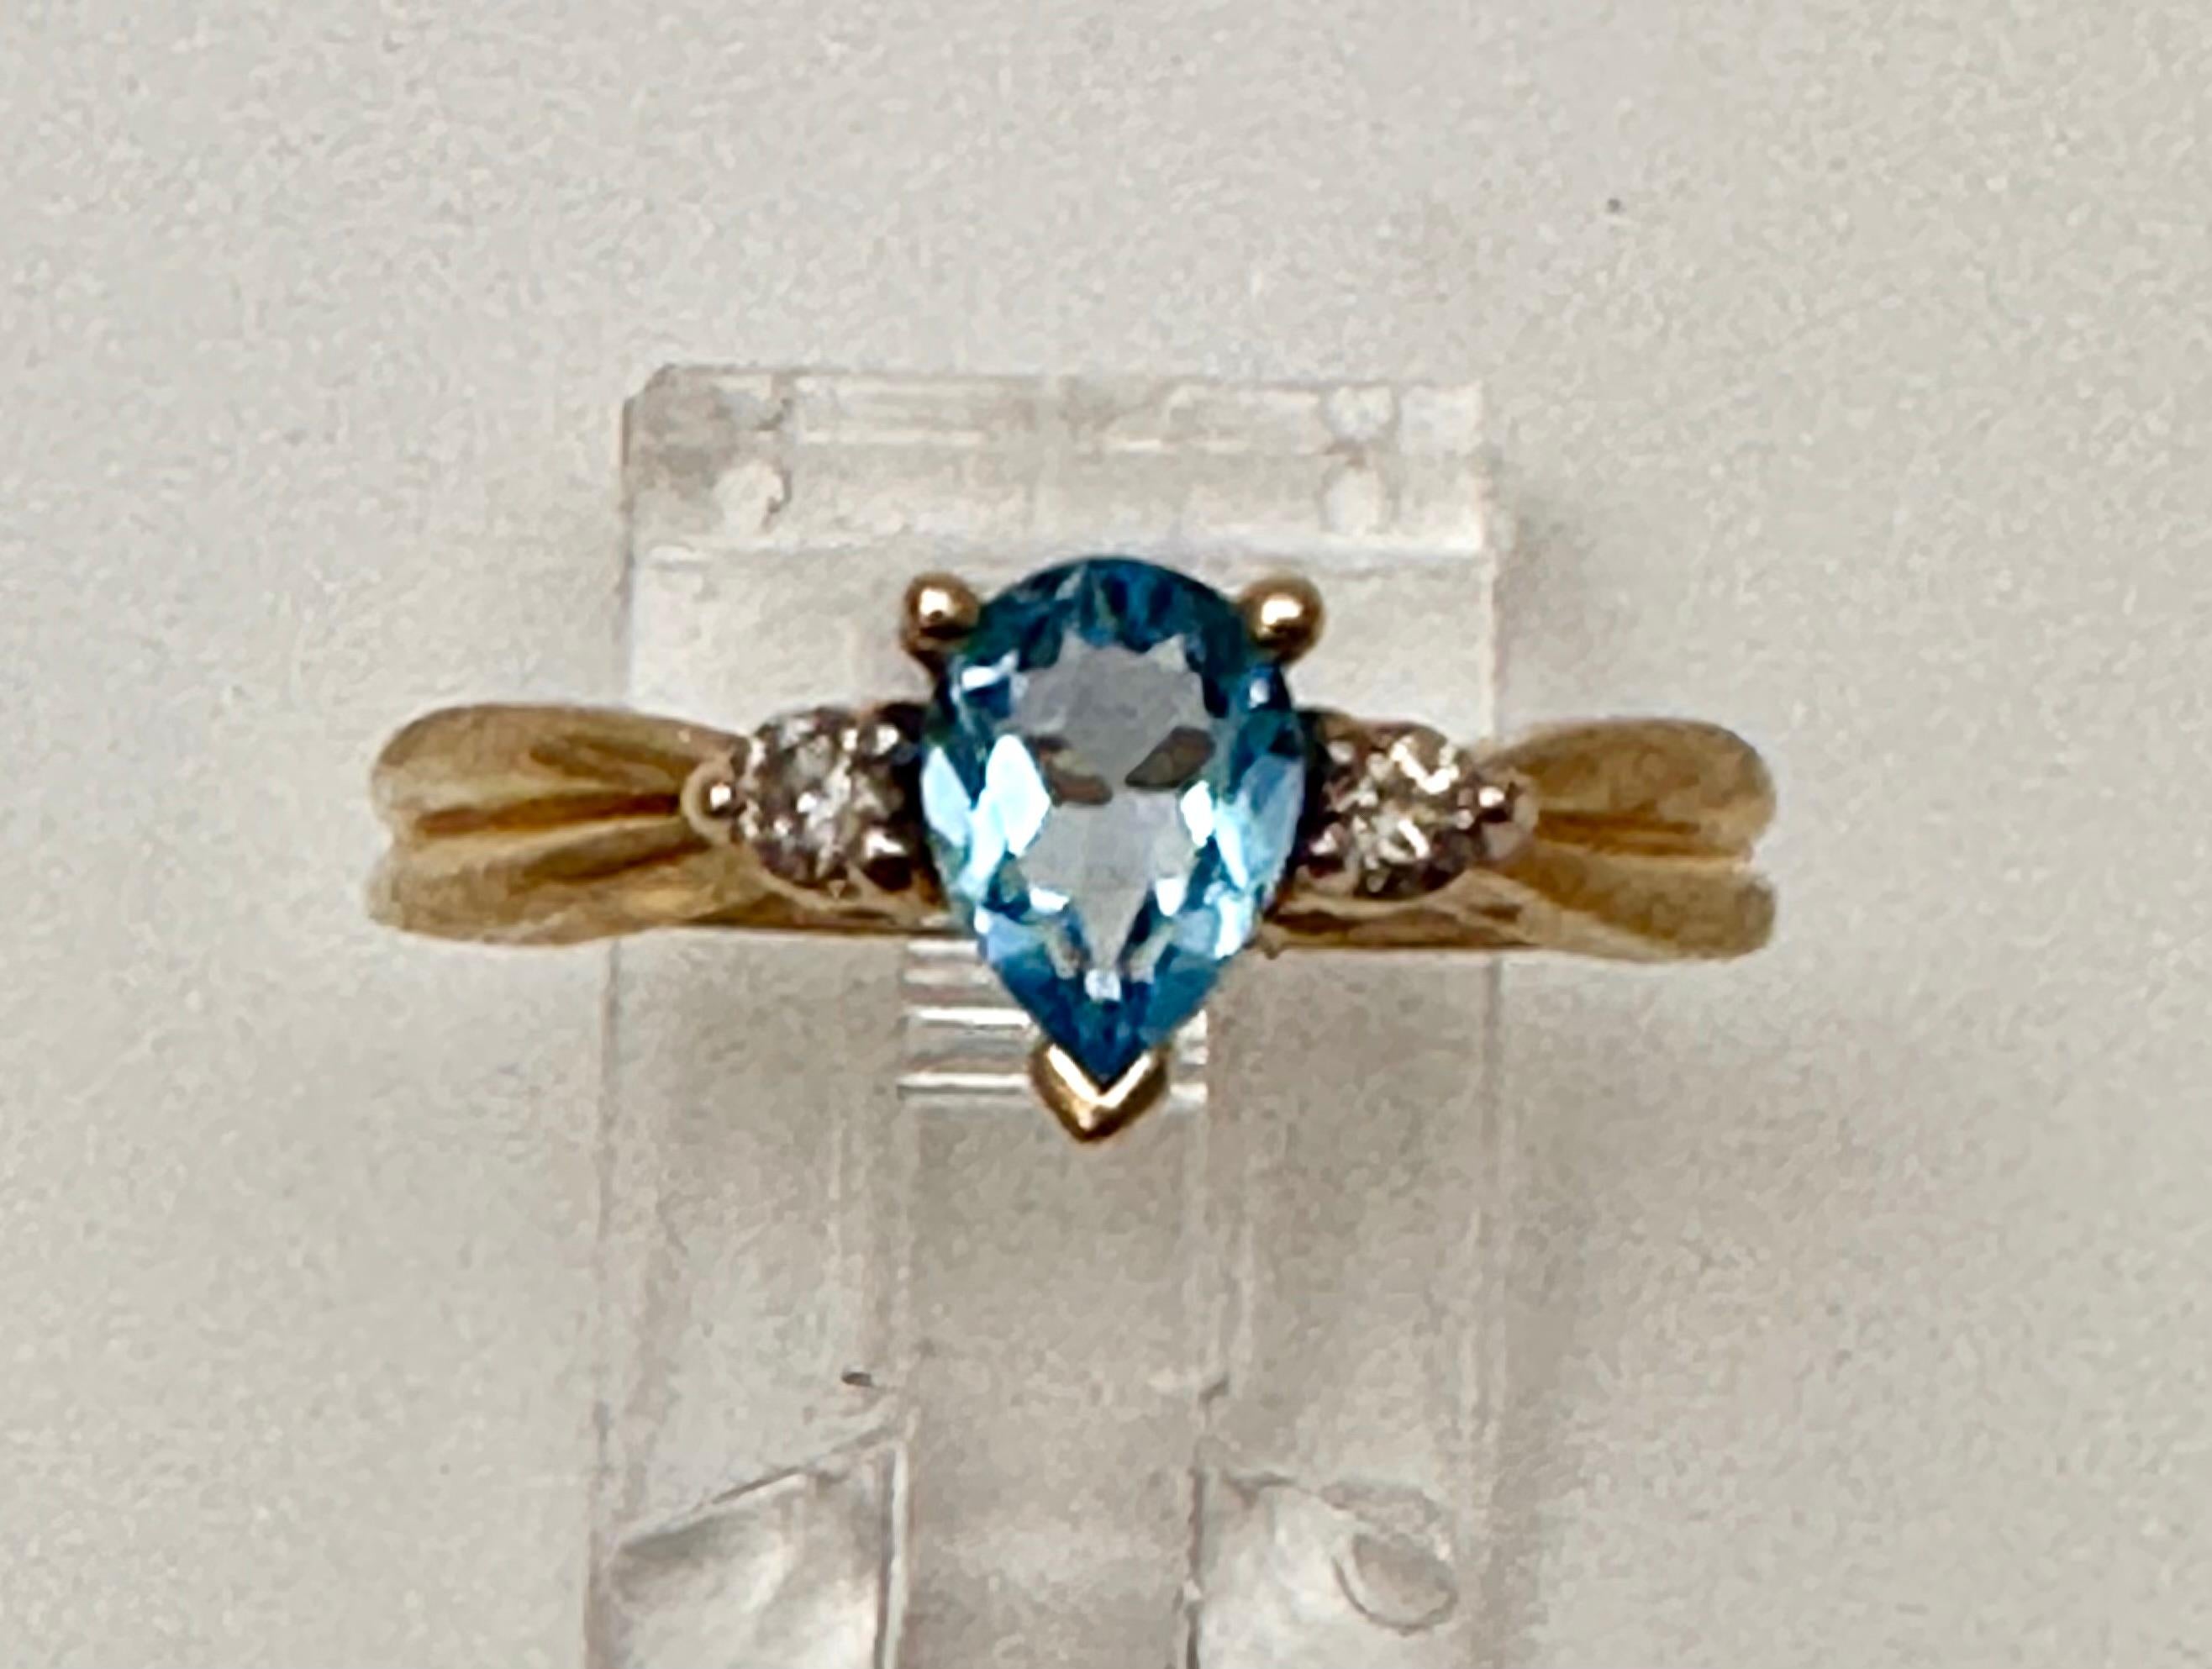 10k Yellow Gold approx. 5mm x 7mm Pear Blue Topaz with 2 sparkly Round Diamonds
Ring Size 7

Blue Topaz Meaning
This vivacious blue gemstone is known as the stone of clarity. The Blue Topaz meaning allows you to channel your inner wisdom and find